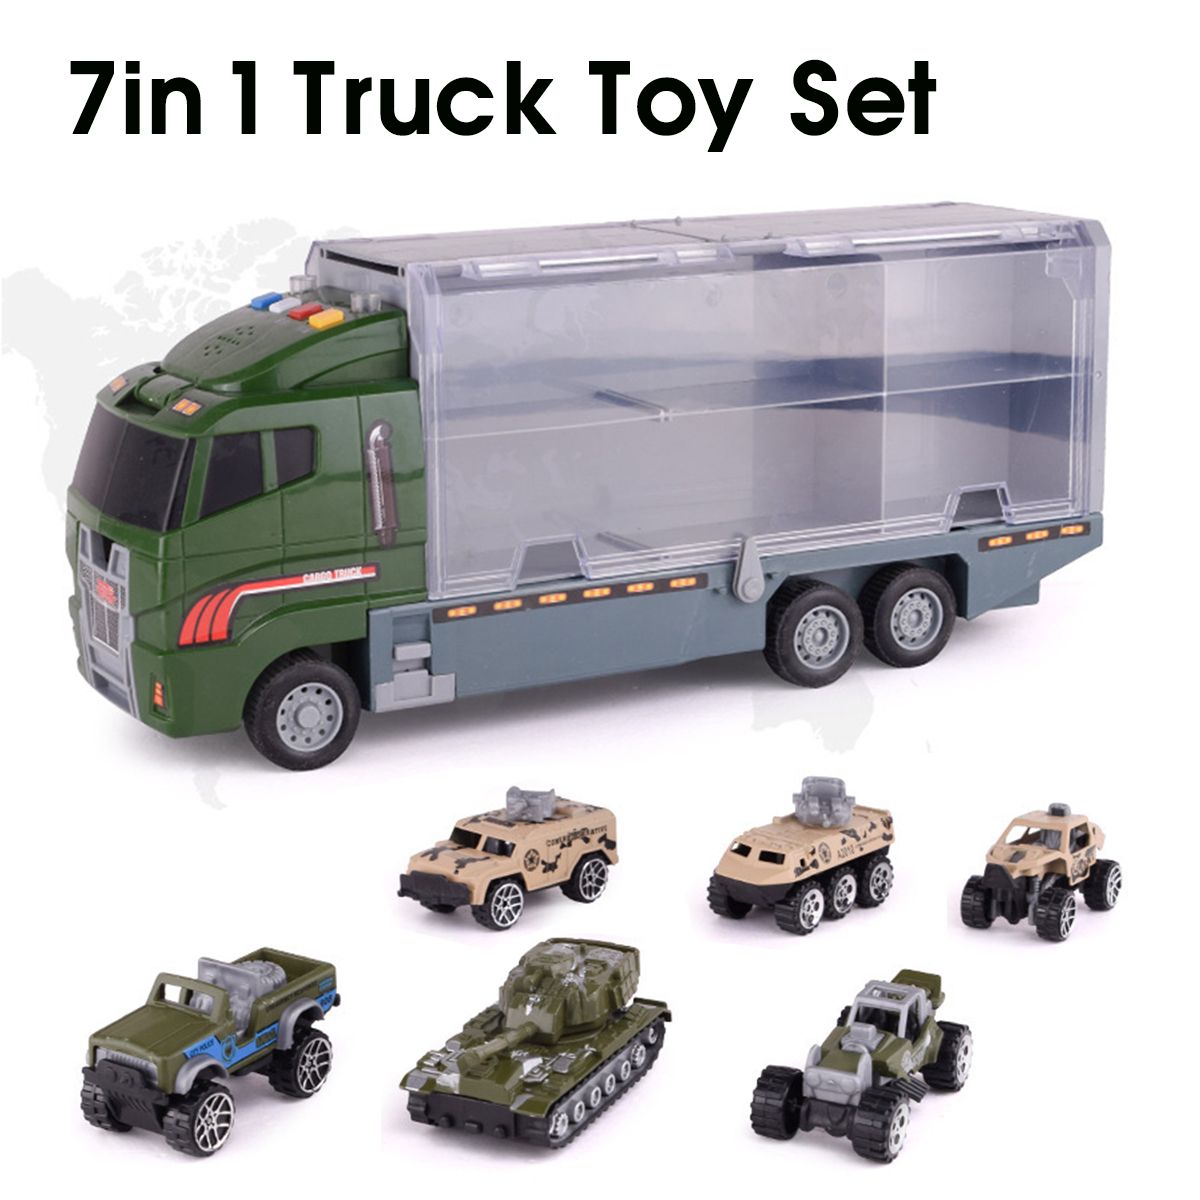 3-Types-Toys-Military-City-Polic-Transport-Truck-with-6-Mini-Cars-Play-Set-Carrier-Lorry-For-Kids-To-1600344